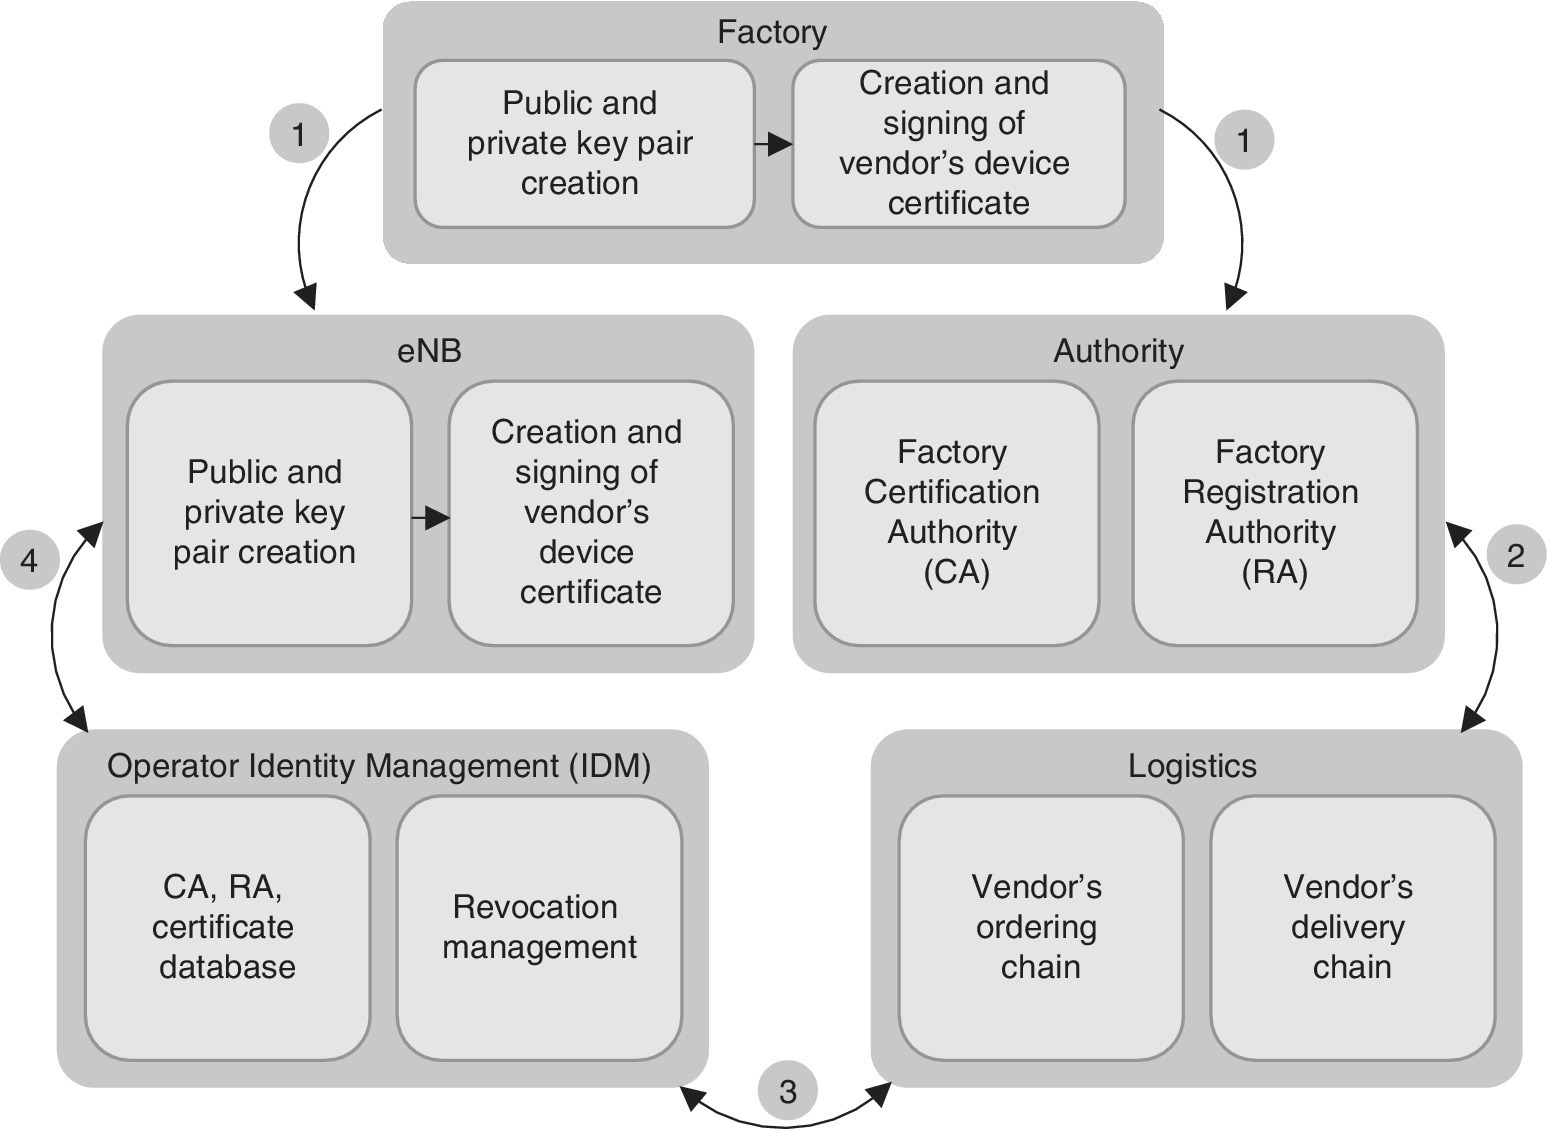 Block flowchart (top–bottom) illustrating the principle of the vendor certificate process from factory to eNB, authority, logistics, operator identity management (IDM), and back to eNB.